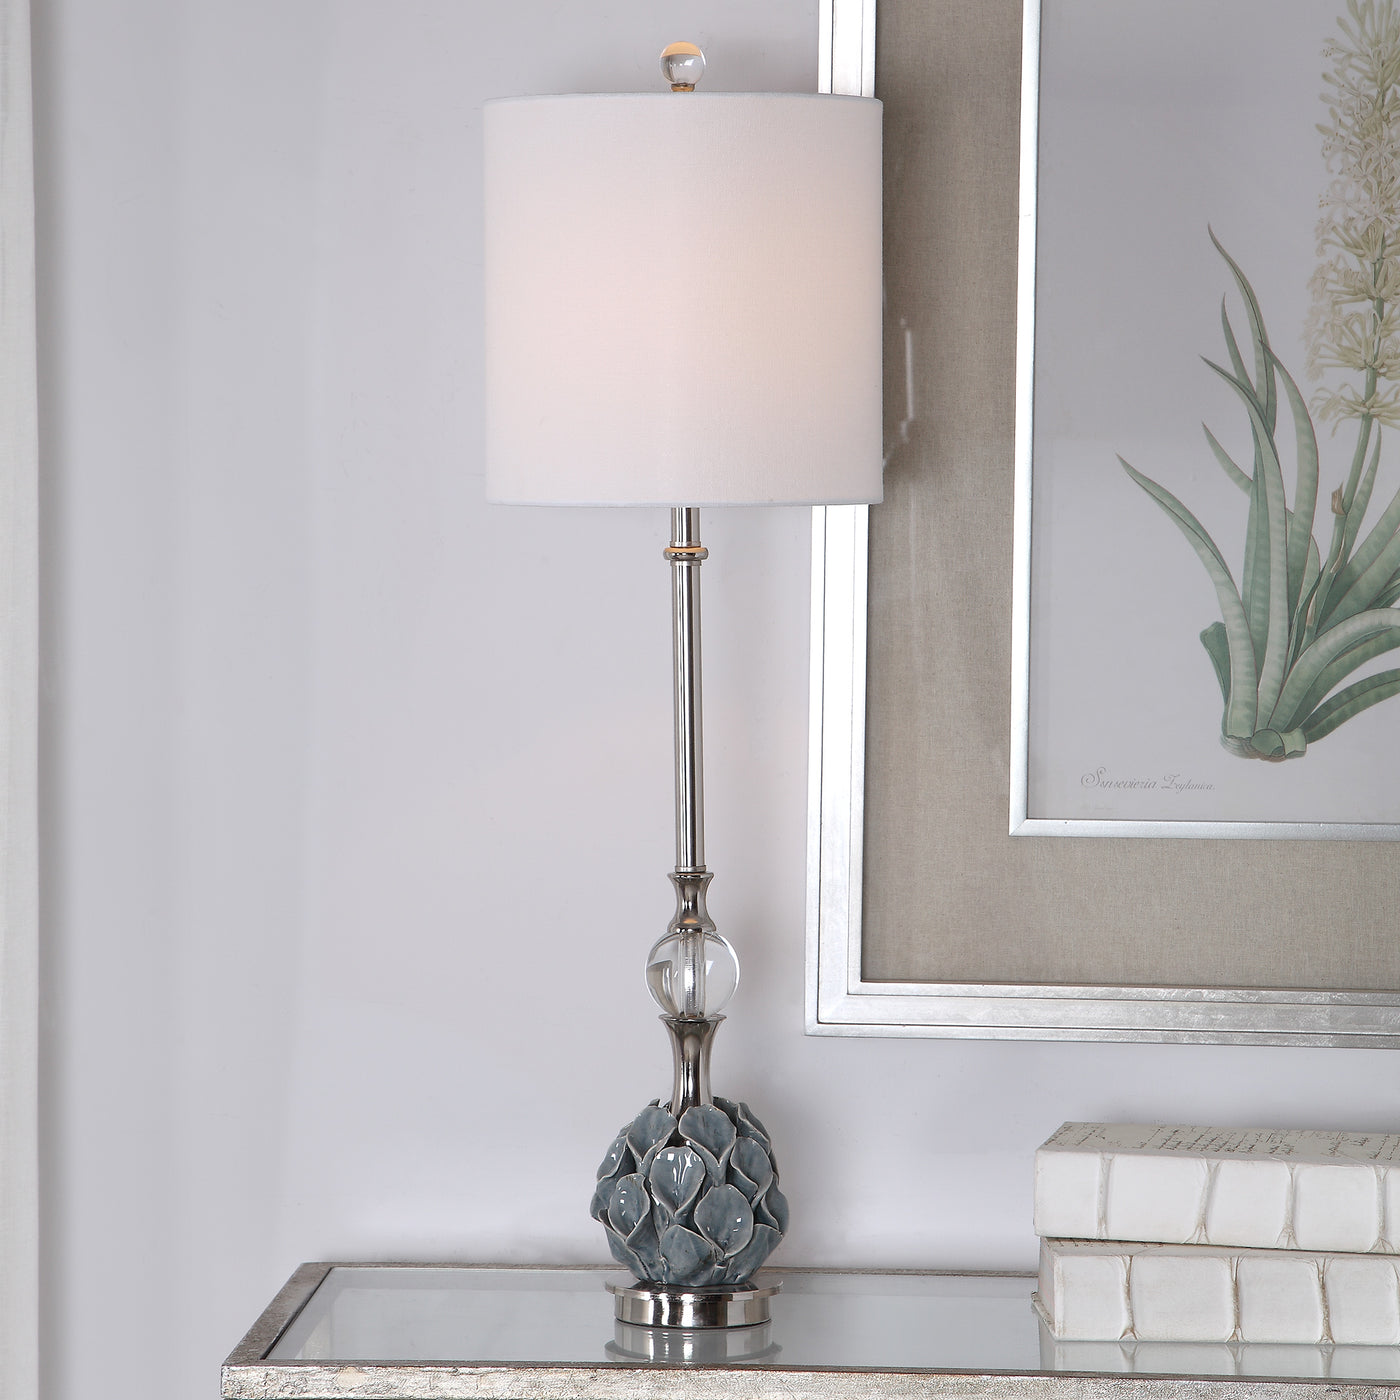 Add A Touch Of Whimsical Style To A Space With This Buffet Lamp Design By Featuring A Decorative Ceramic Calla Lilies Bouq...